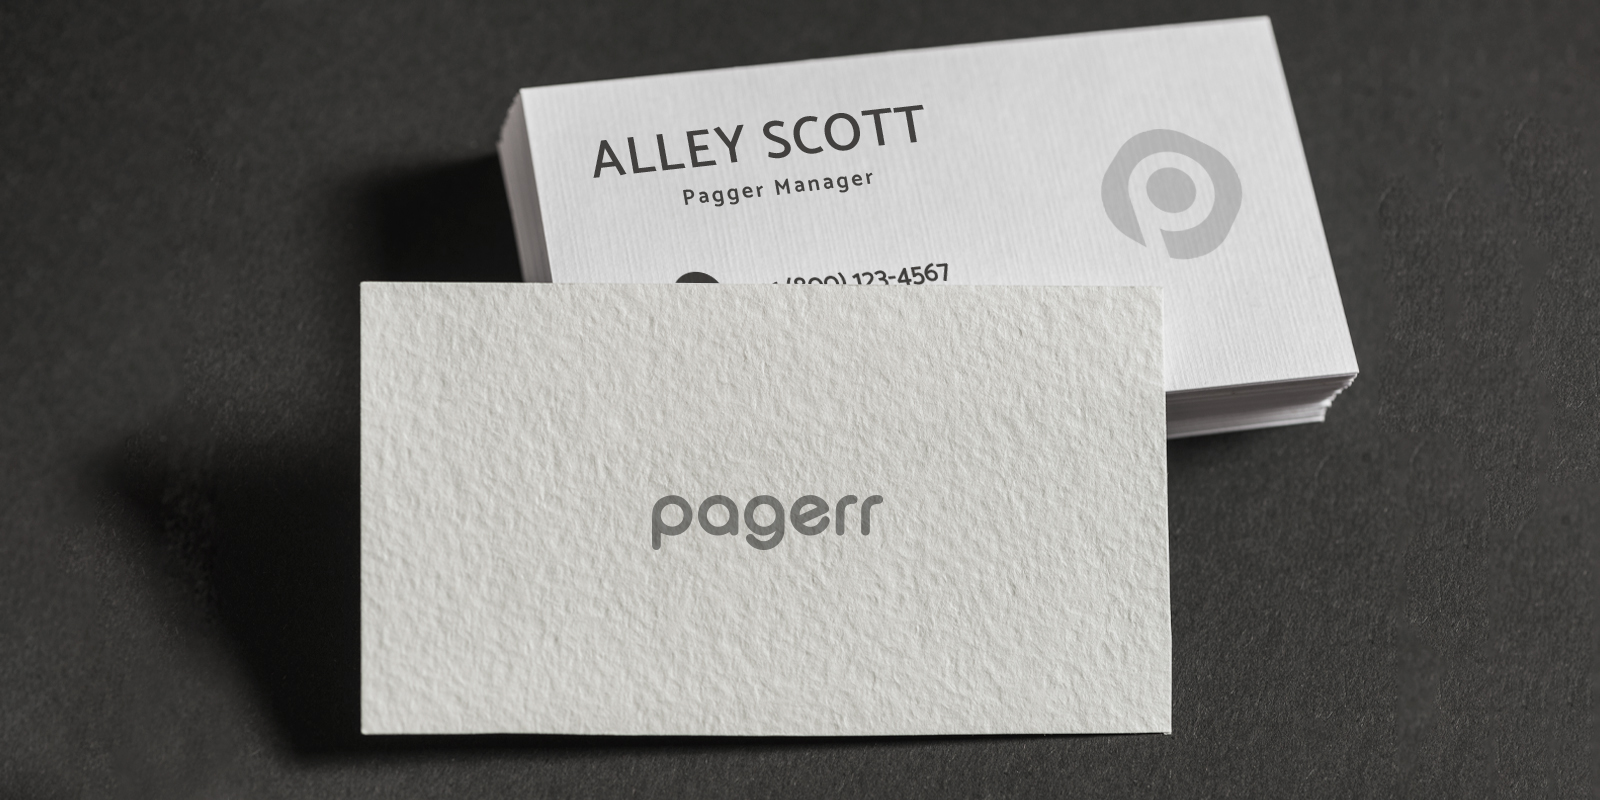 Special material business cards in Brisbane - Print with Pagerr